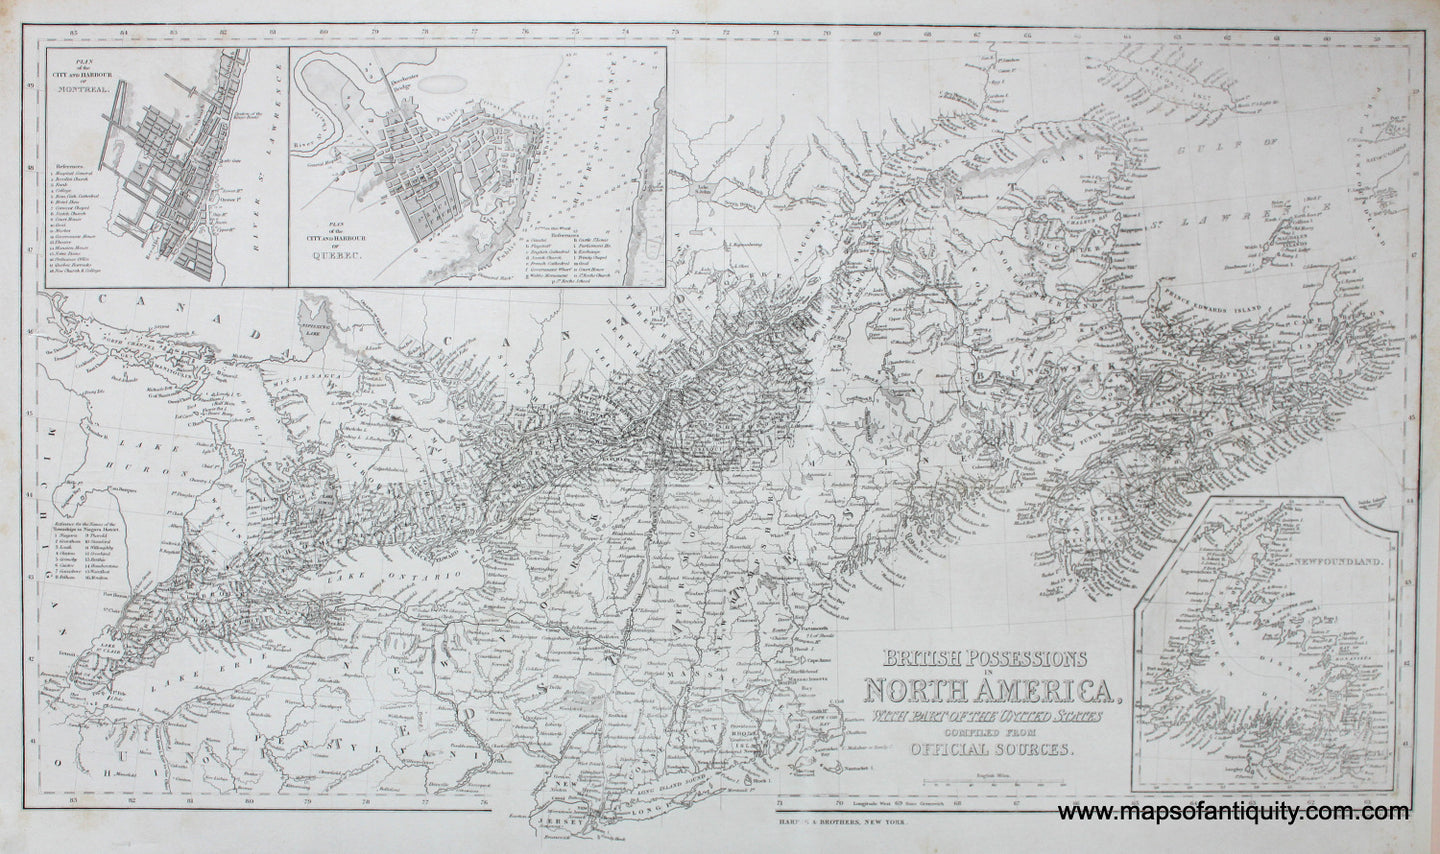 Black-and-White-Antique-Map-British-Possessions-in-North-America-with-part-of-the-United-States-compiled-from-Official-Sources.-******-Canada-Northeast-General-1843-Harper-&-Brothers-Maps-Of-Antiquity